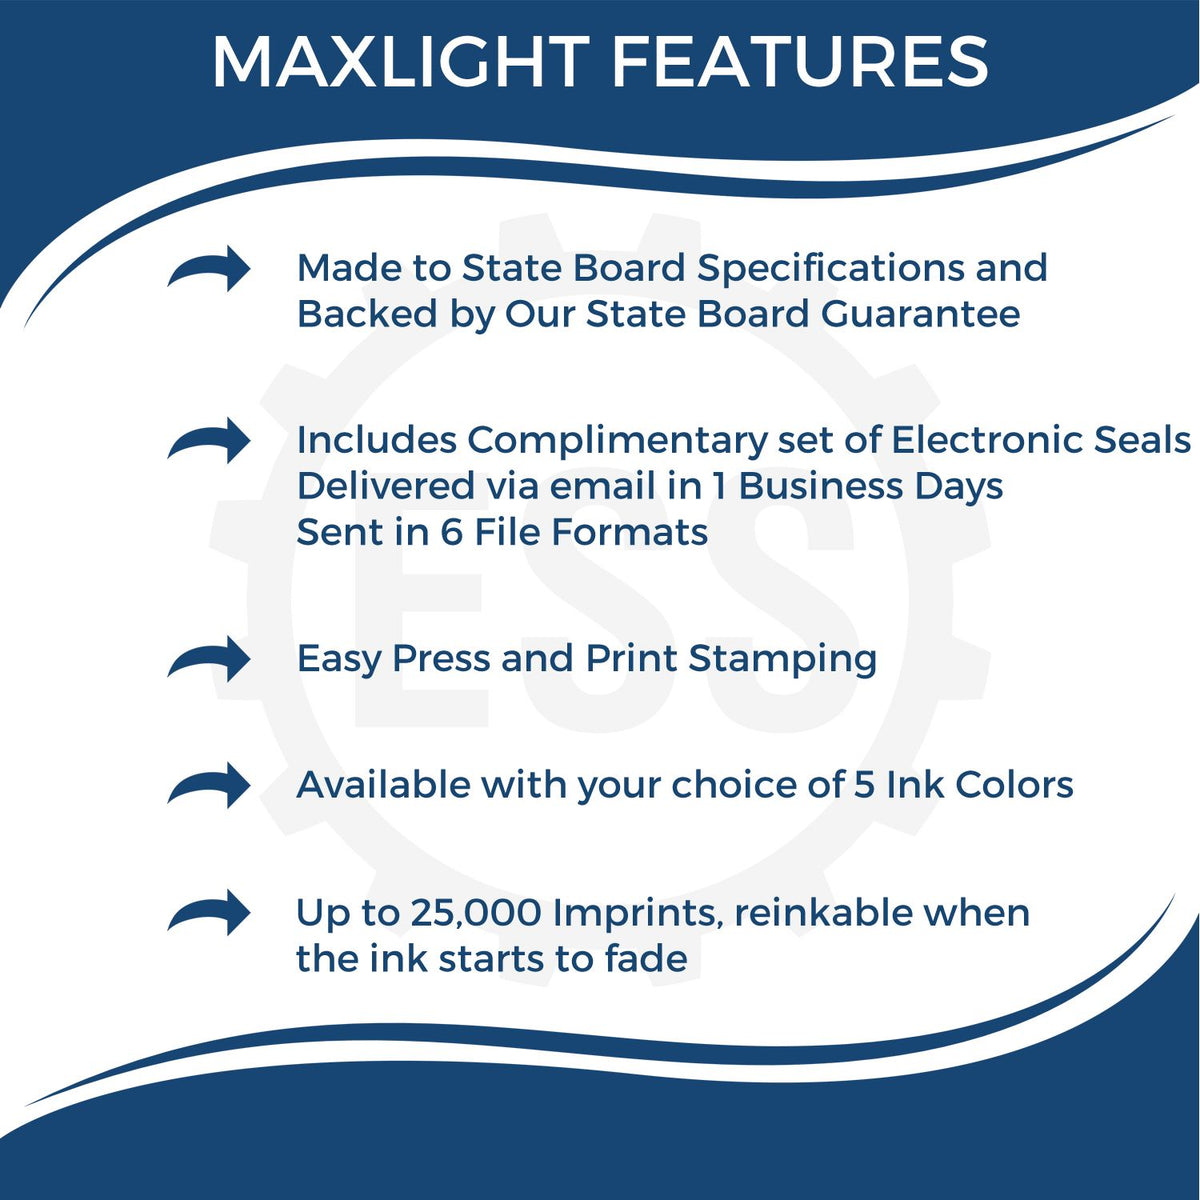 A picture of an infographic highlighting the selling points for the Premium MaxLight Pre-Inked Alabama Engineering Stamp